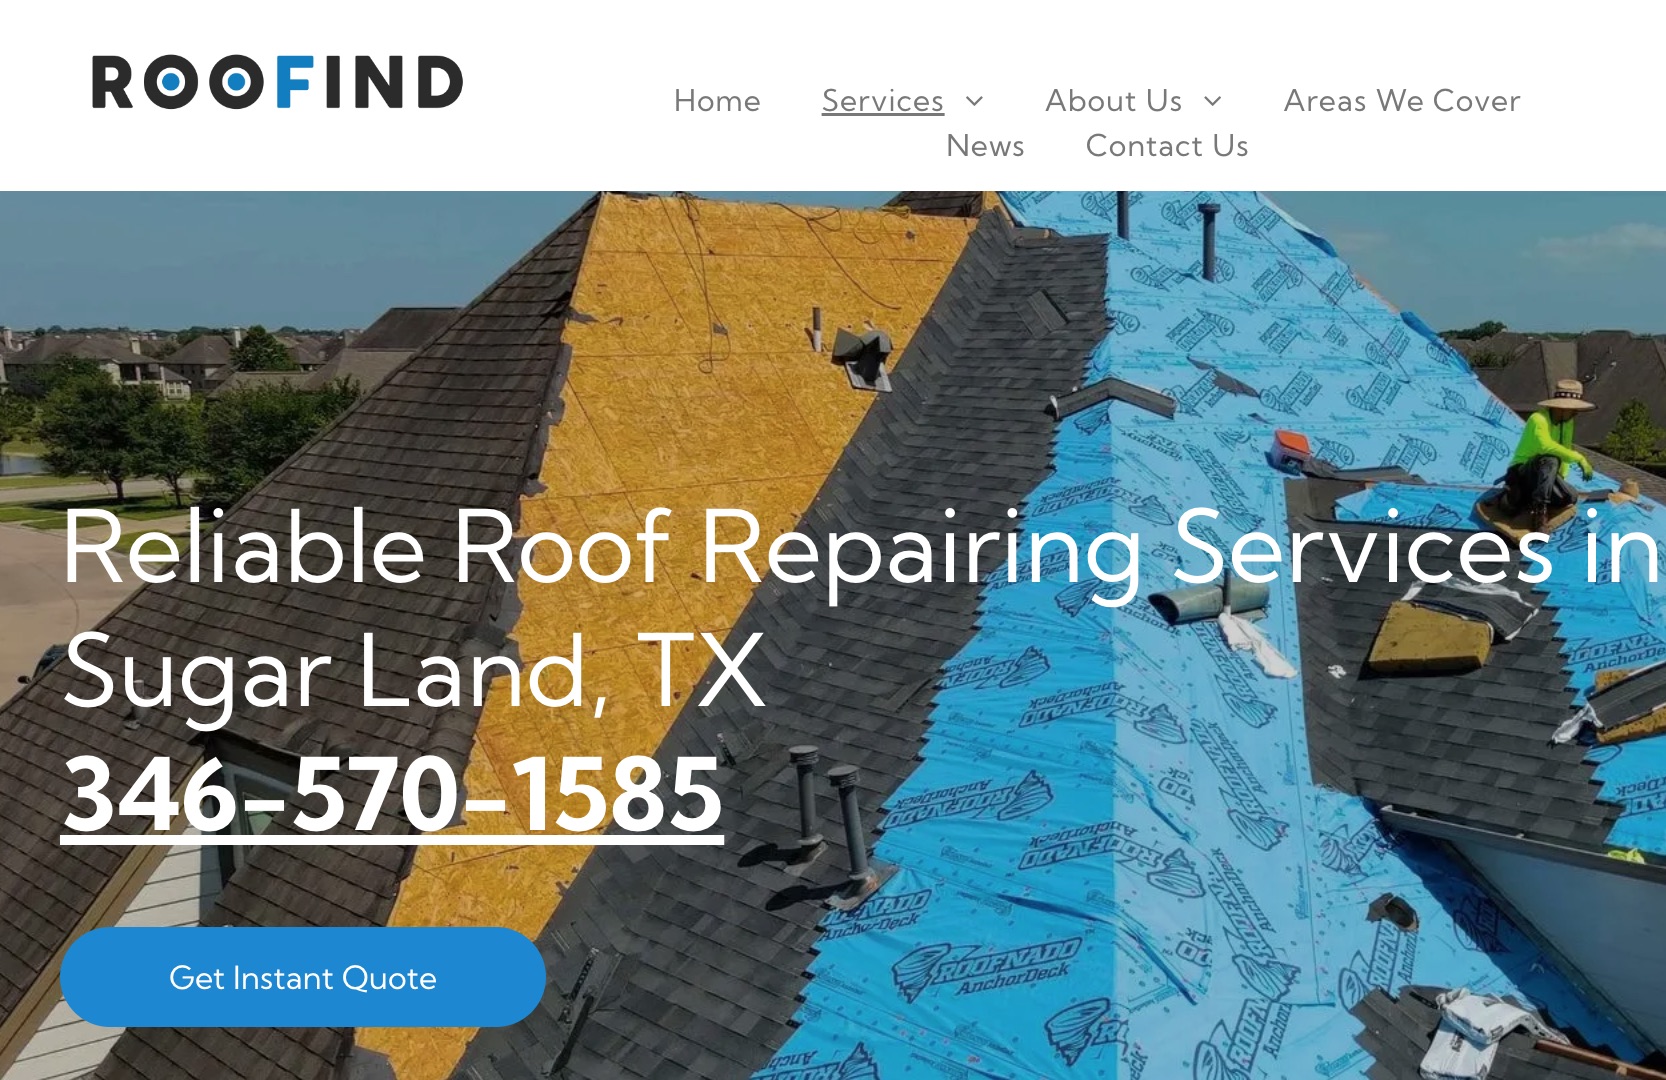 Discover the Best Roofing Service in Houston with Roofind: Roofing and Siding Experts